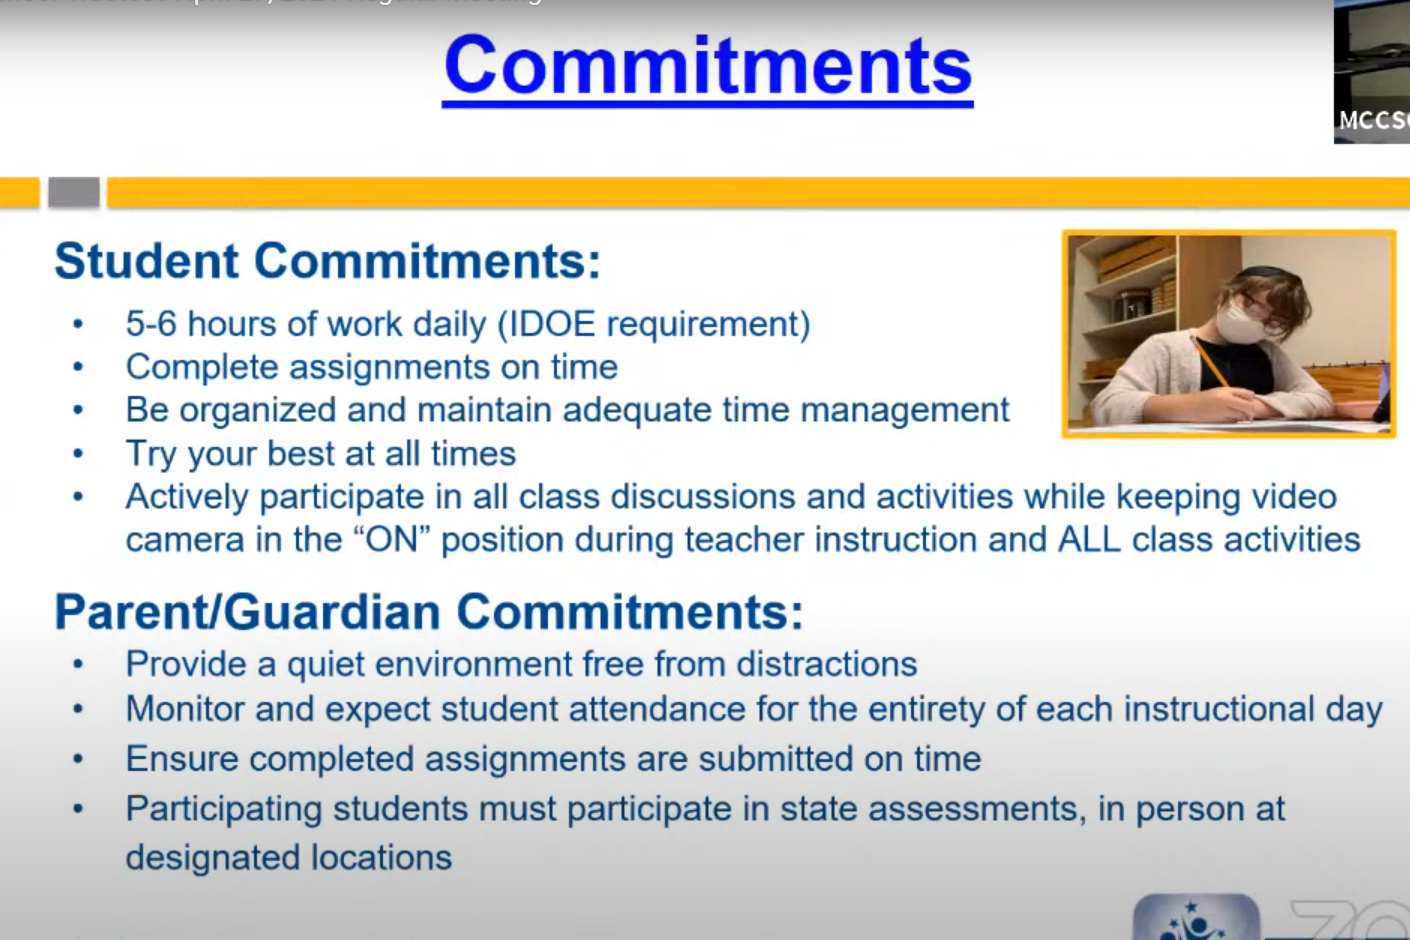 A PowerPoint slide of commitments MCCSC students who want to learn virtually next year must make.